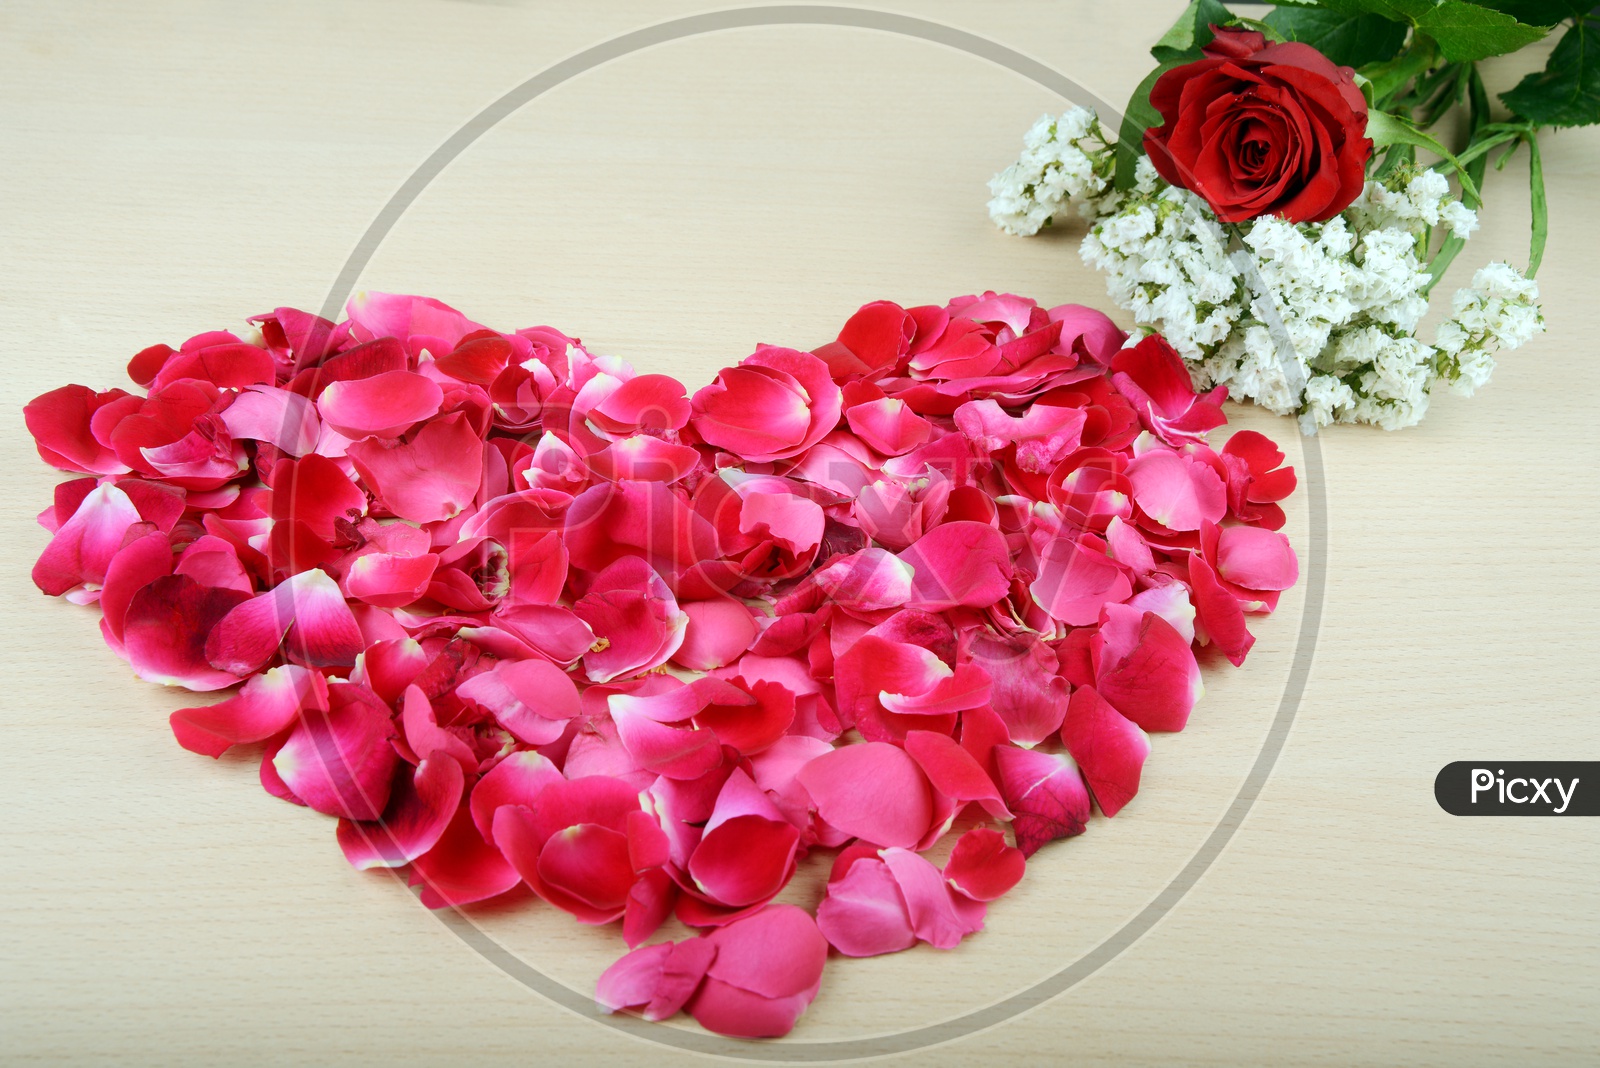 Red Rose petals  in heart shape